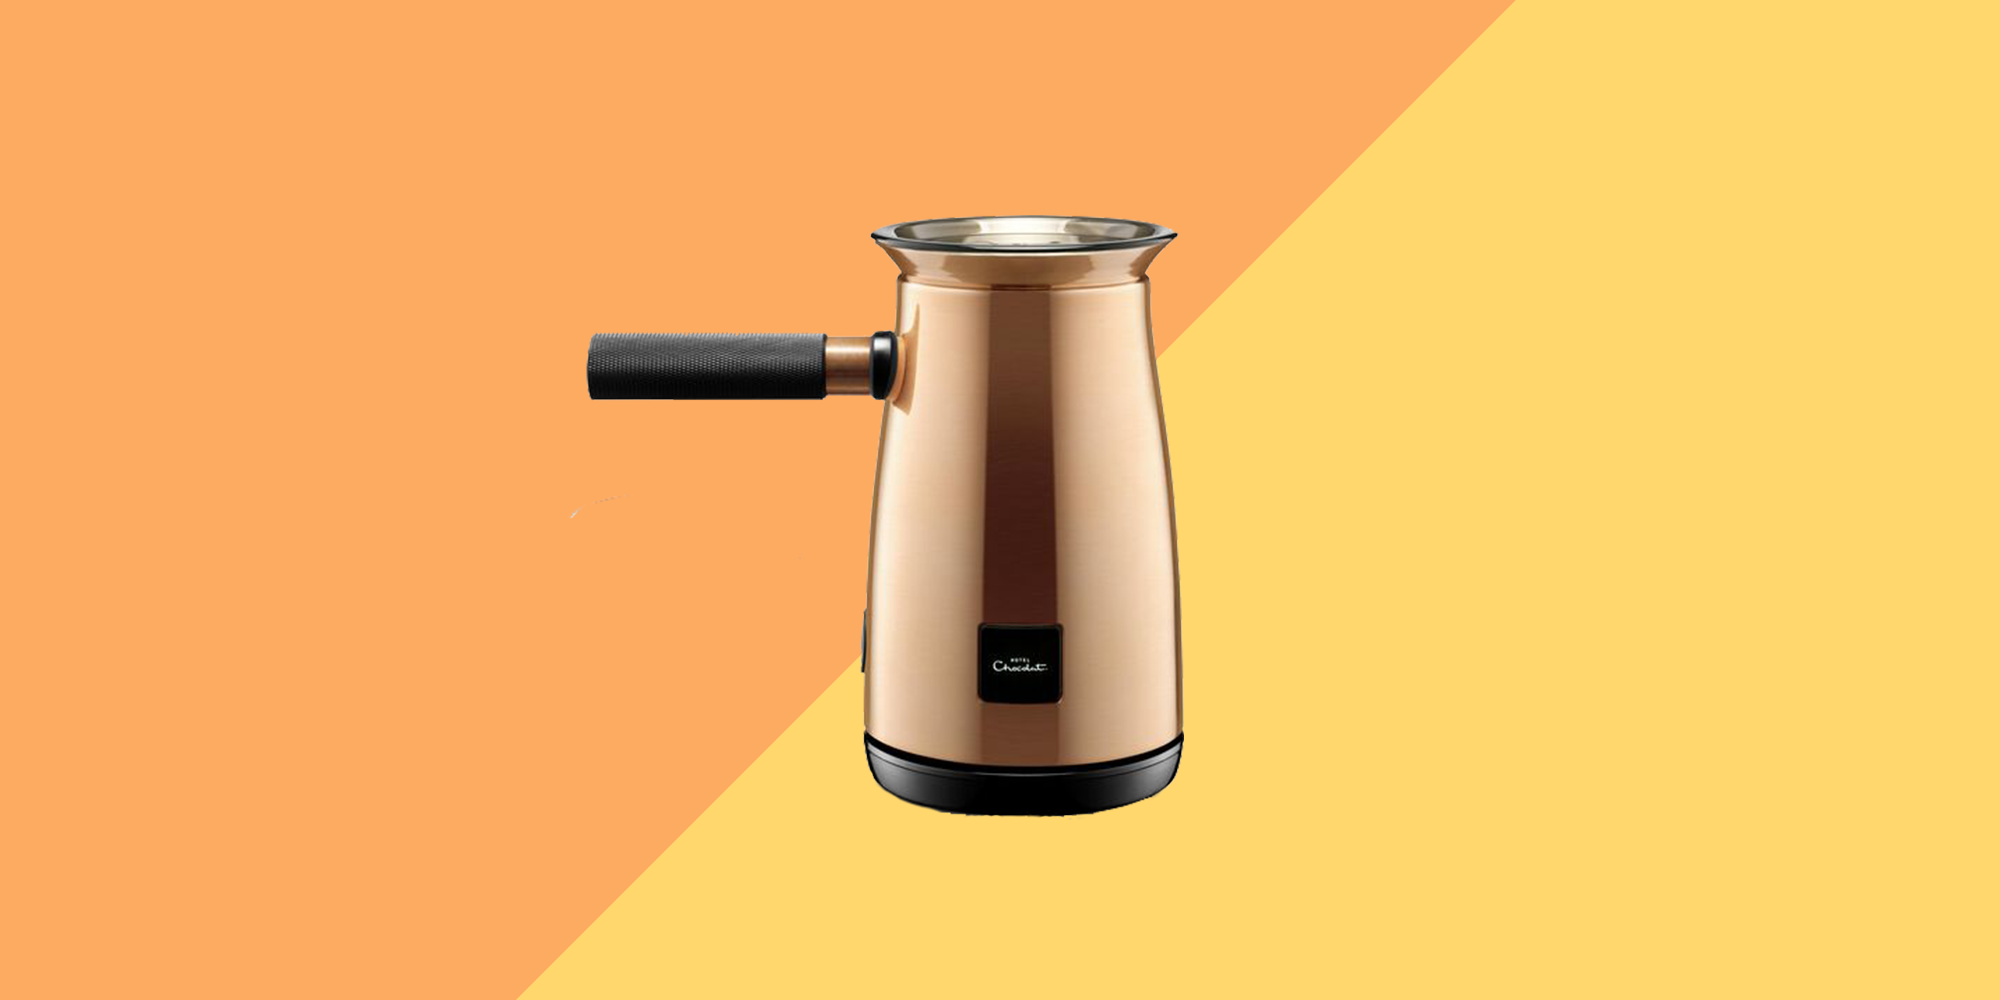 Hotel Chocolat Velvetiser review: is this hot chocolate maker